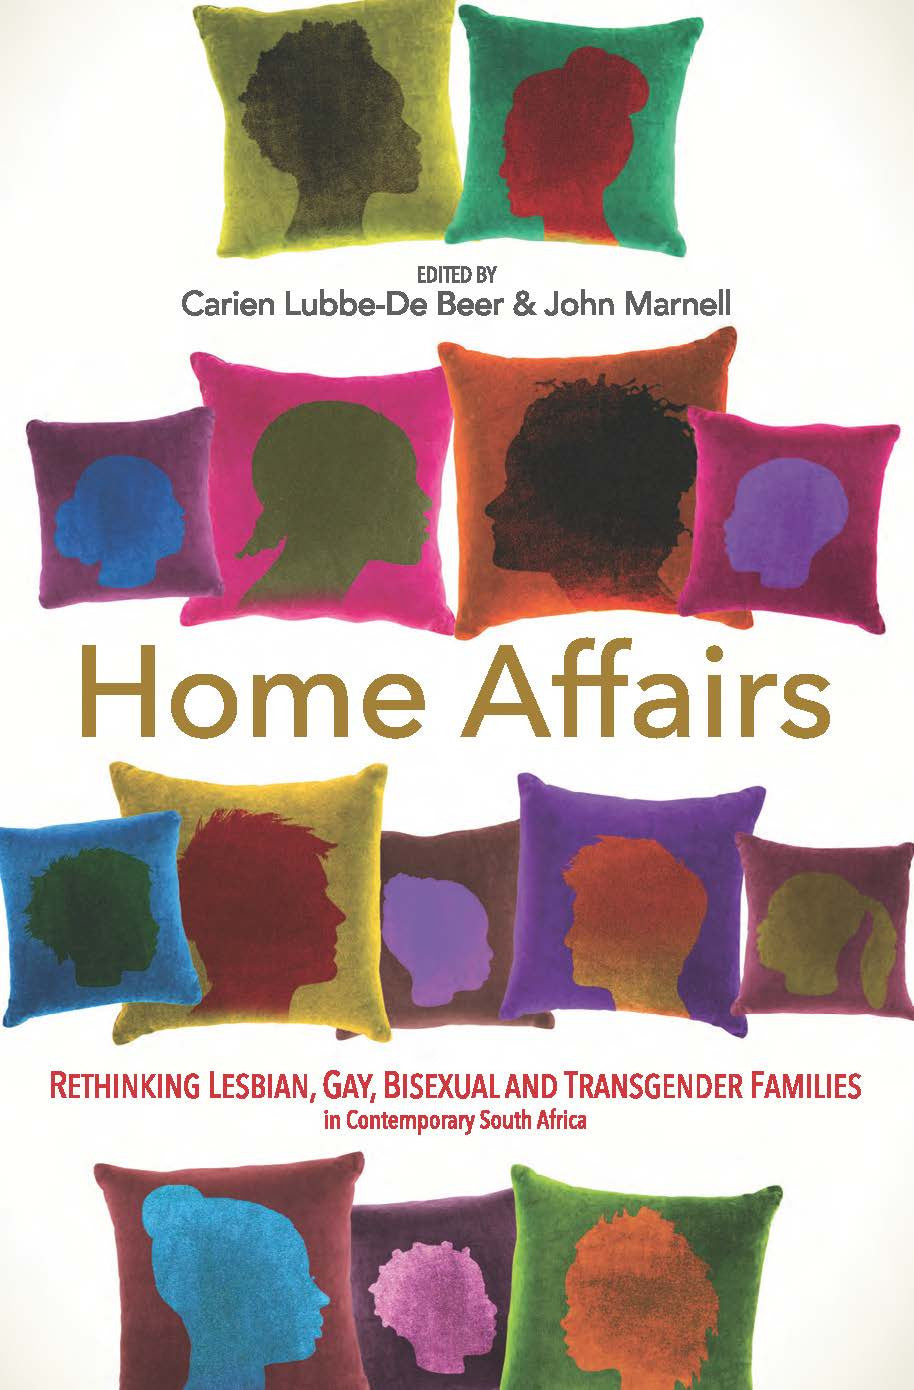 Home affairs: Rethinking same-sex families and relationships in contemporary South Africa